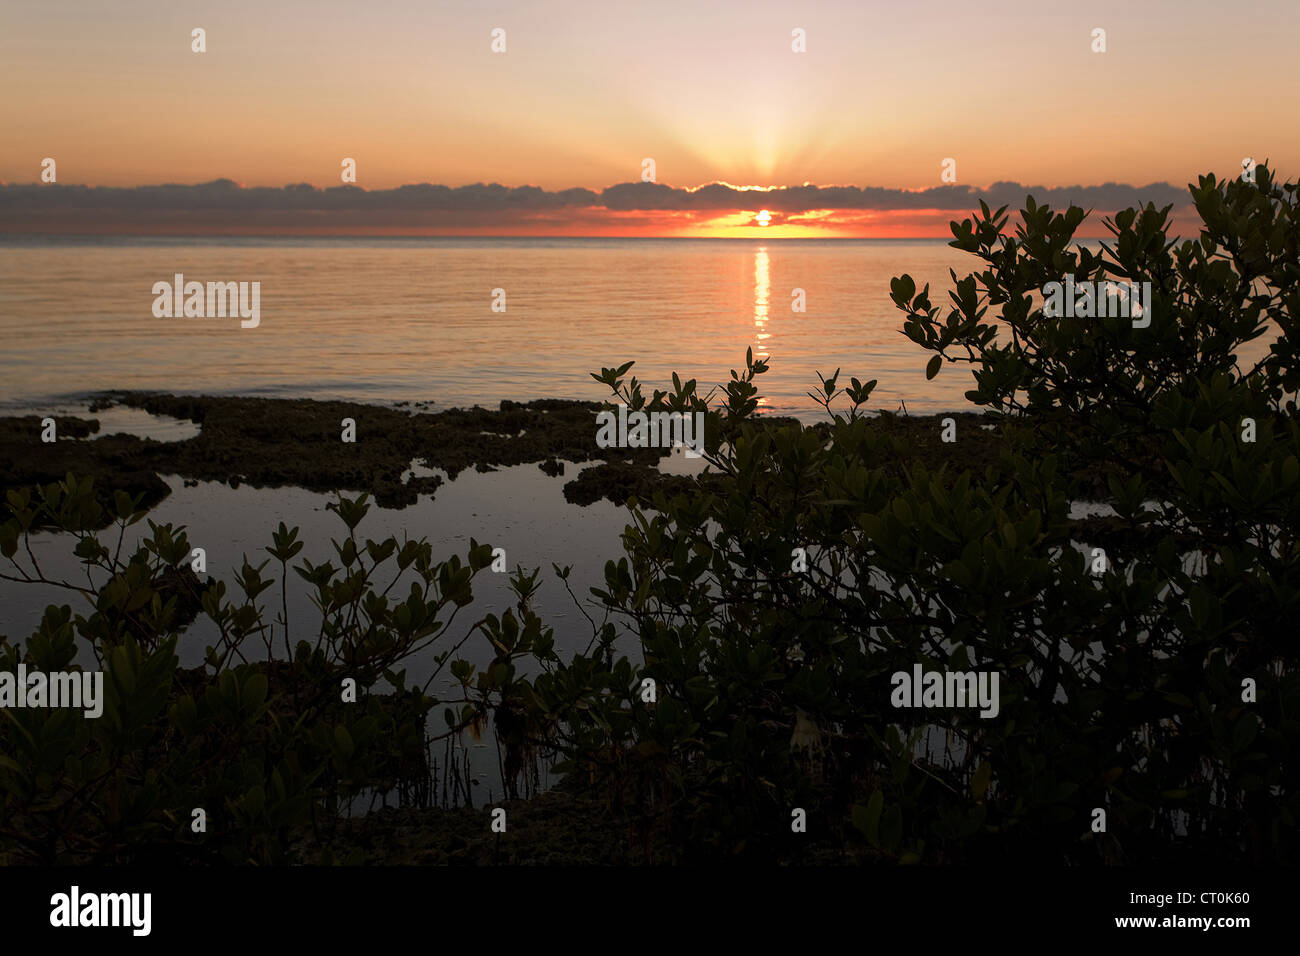 South Florida Sunrise in Mangrove Trees, near Biscayne Bay Stock Photo